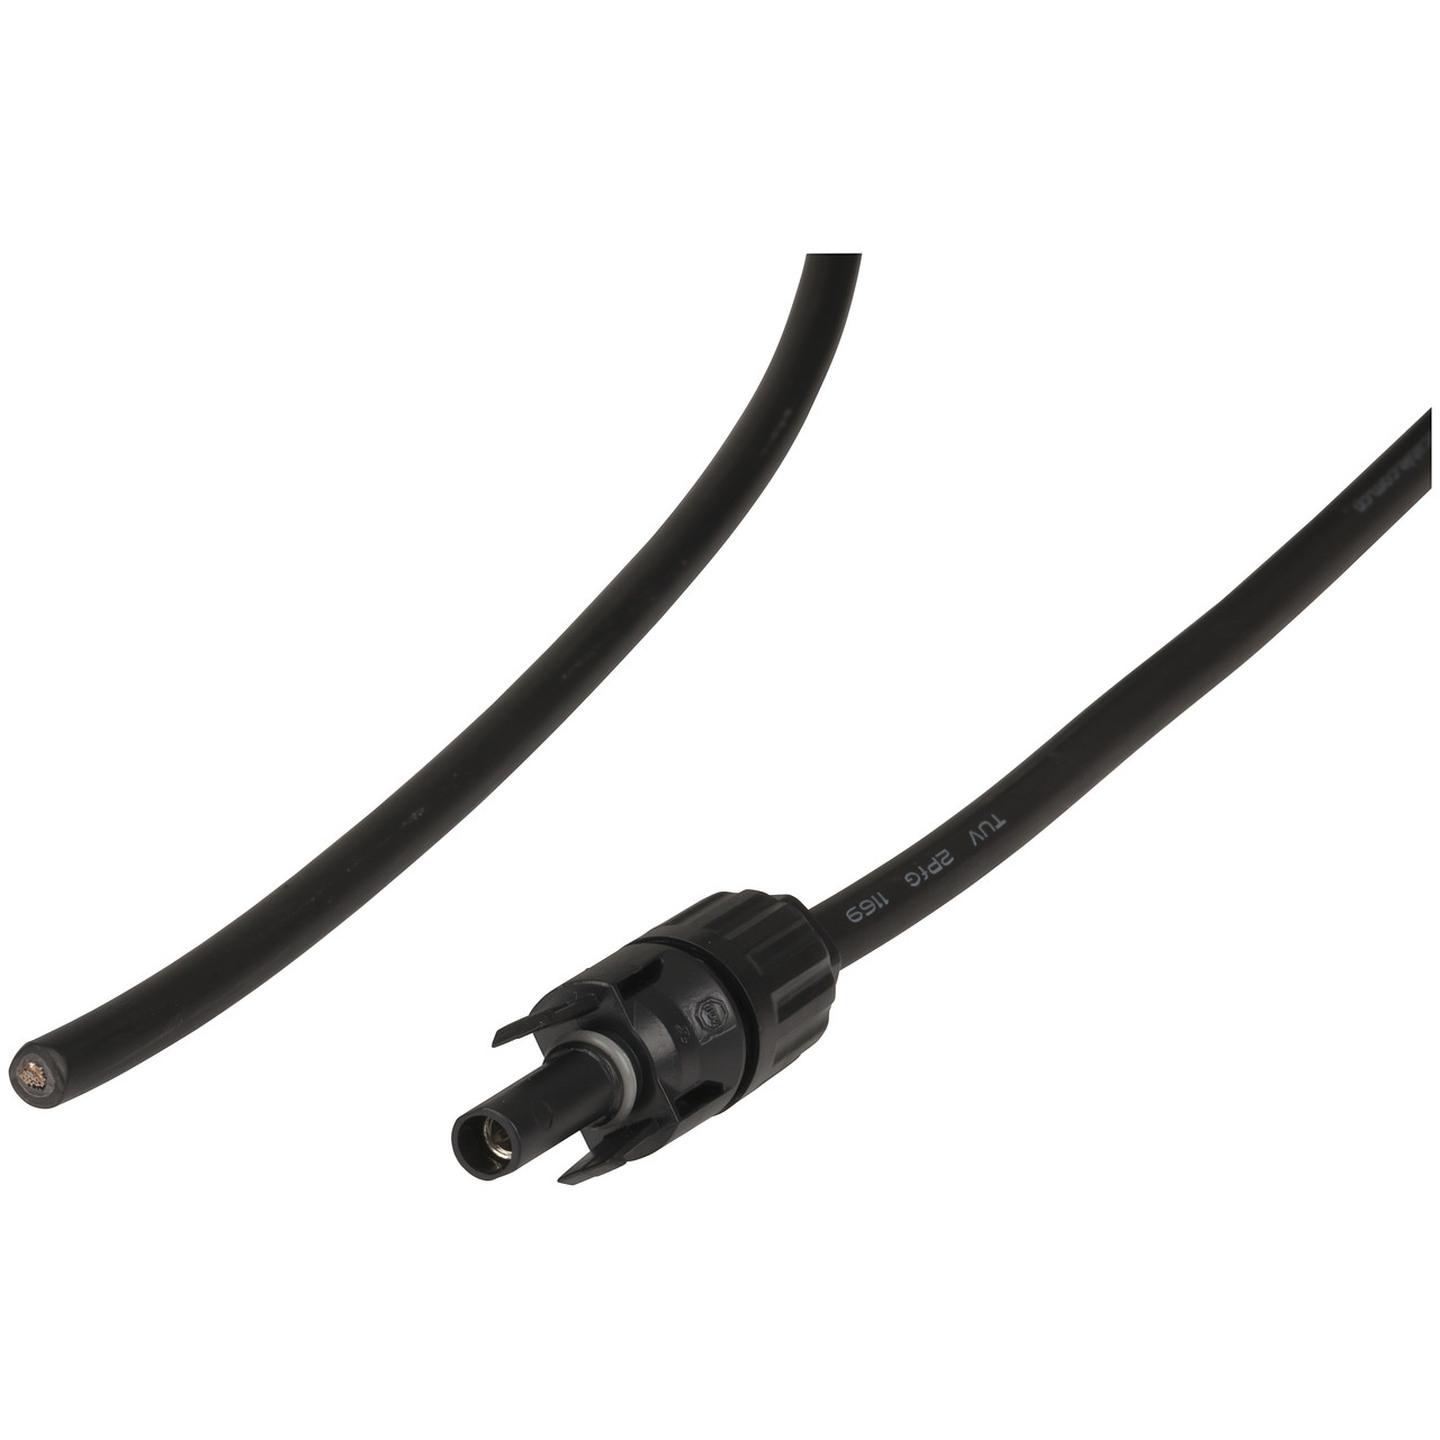 2m Premade PV Power Cable with PV Style Plug to Bare End